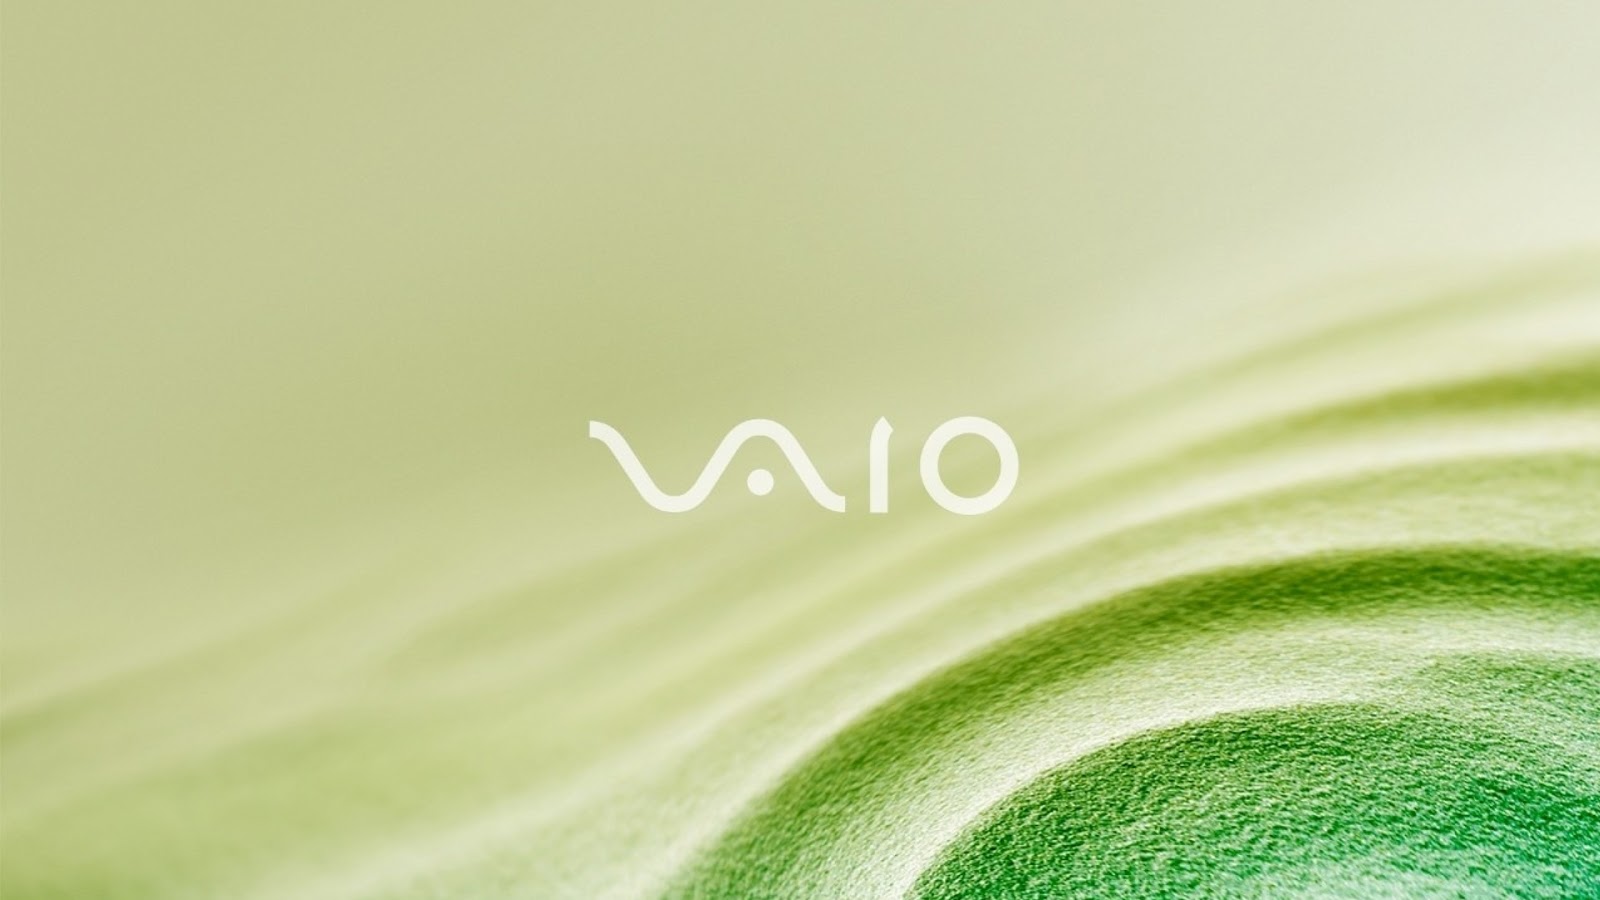 Free Download Sony Vaio Hd Wallpapers Hd Wallpapers High Definition Iphone Hd 1600x900 For Your Desktop Mobile Tablet Explore 50 Sony Vaio Wallpaper 1080p Sony Wallpapers 19x1080 Sony Vaio